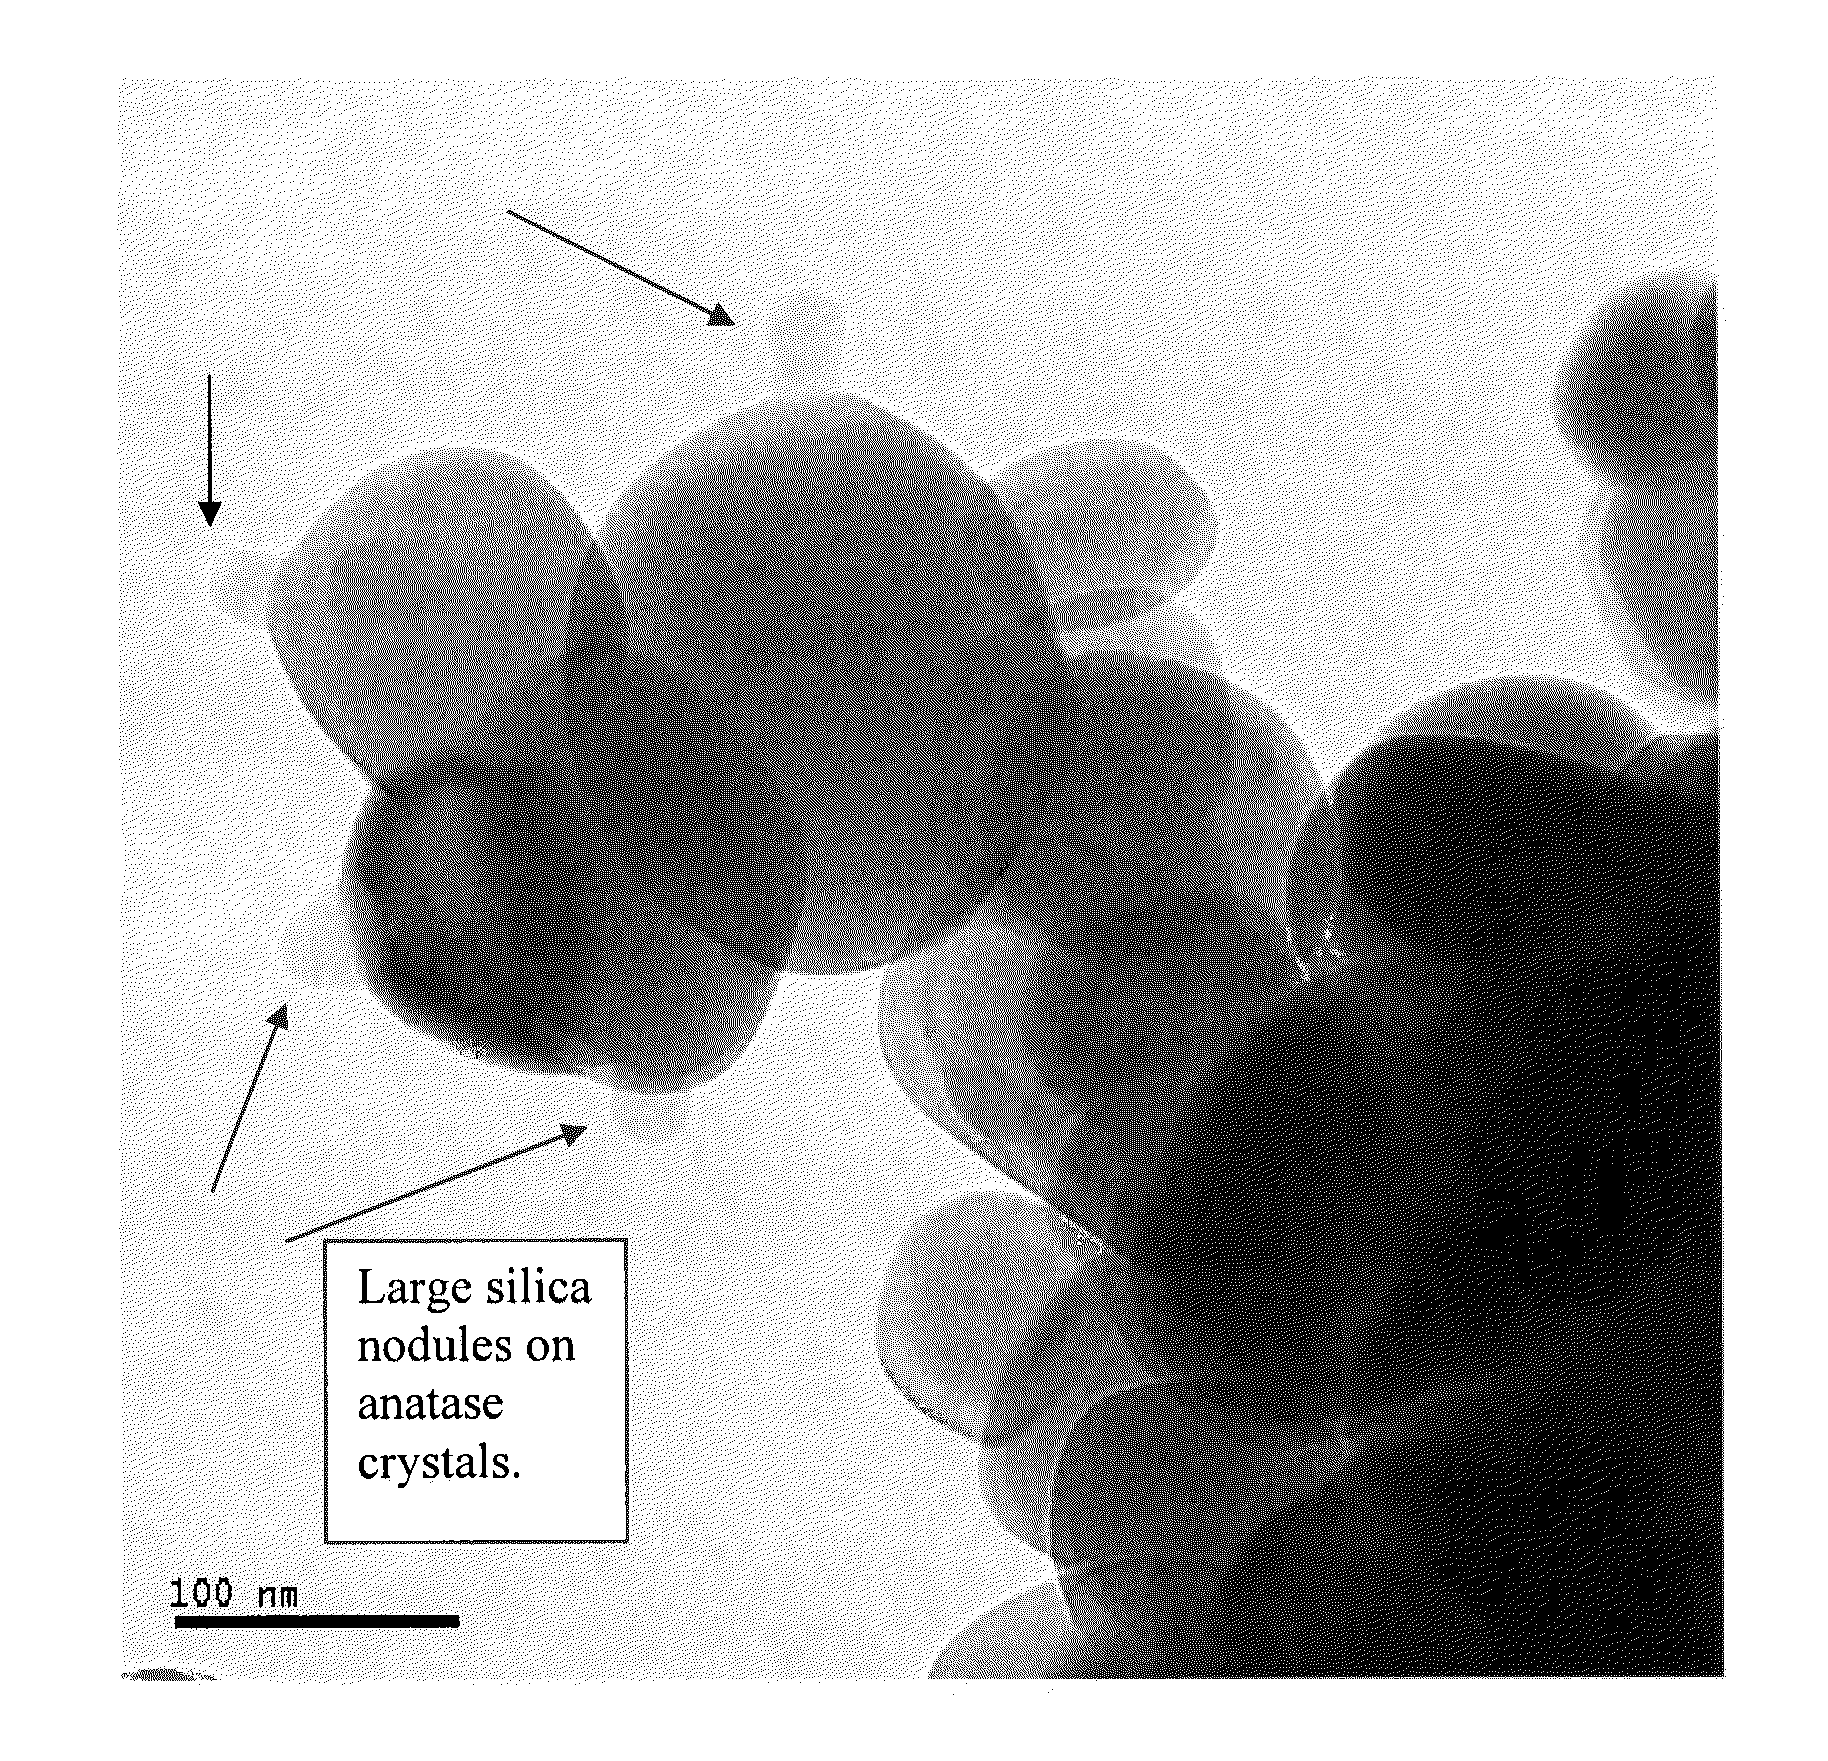 Silica-stabilized ultrafine anatase titania, vanadia catalysts, and methods of production thereof